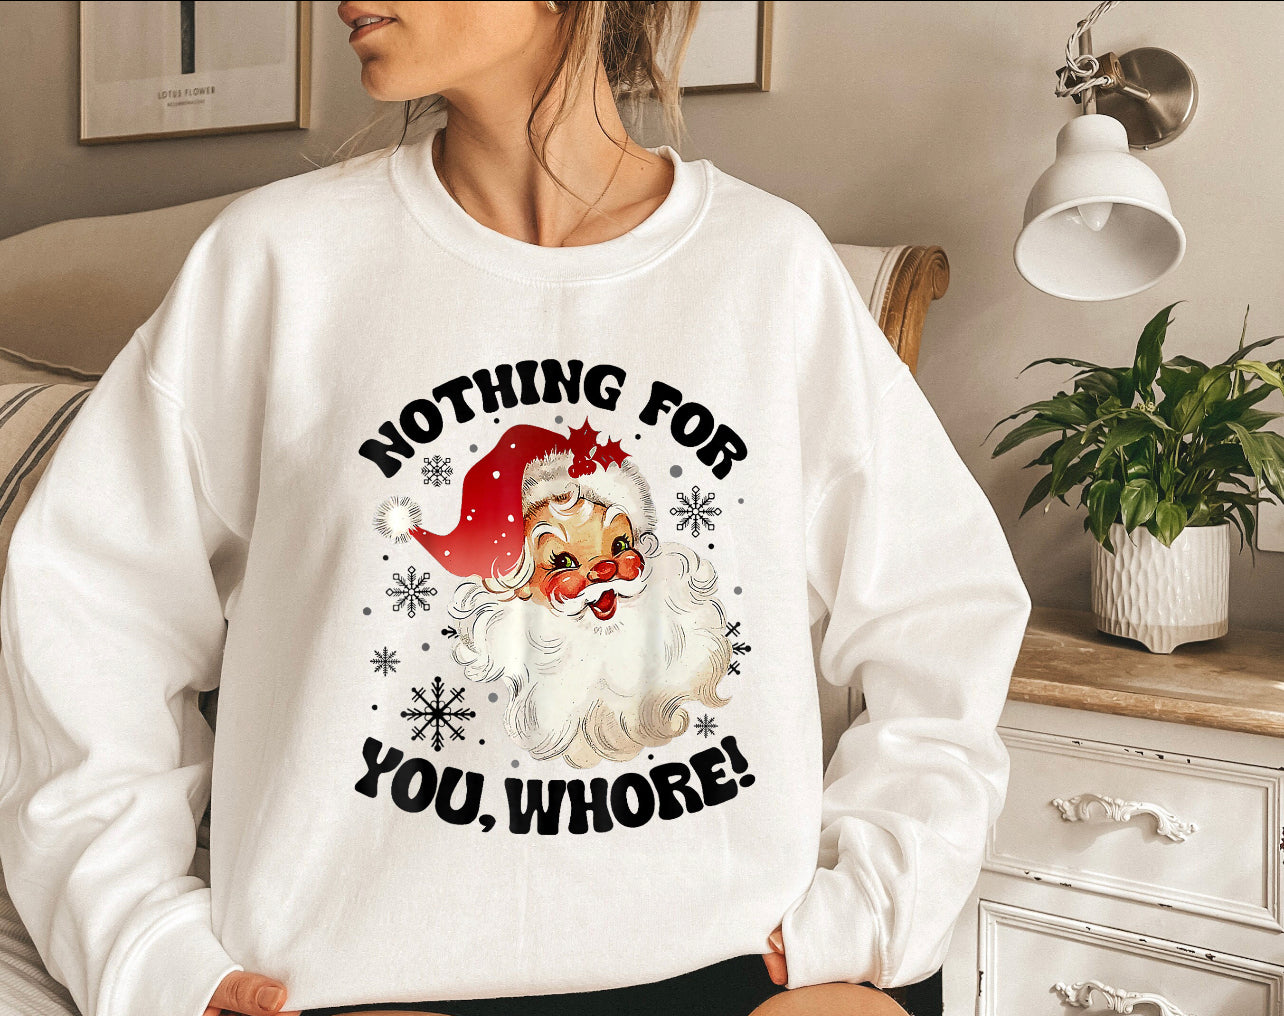 Nothing for you crewneck